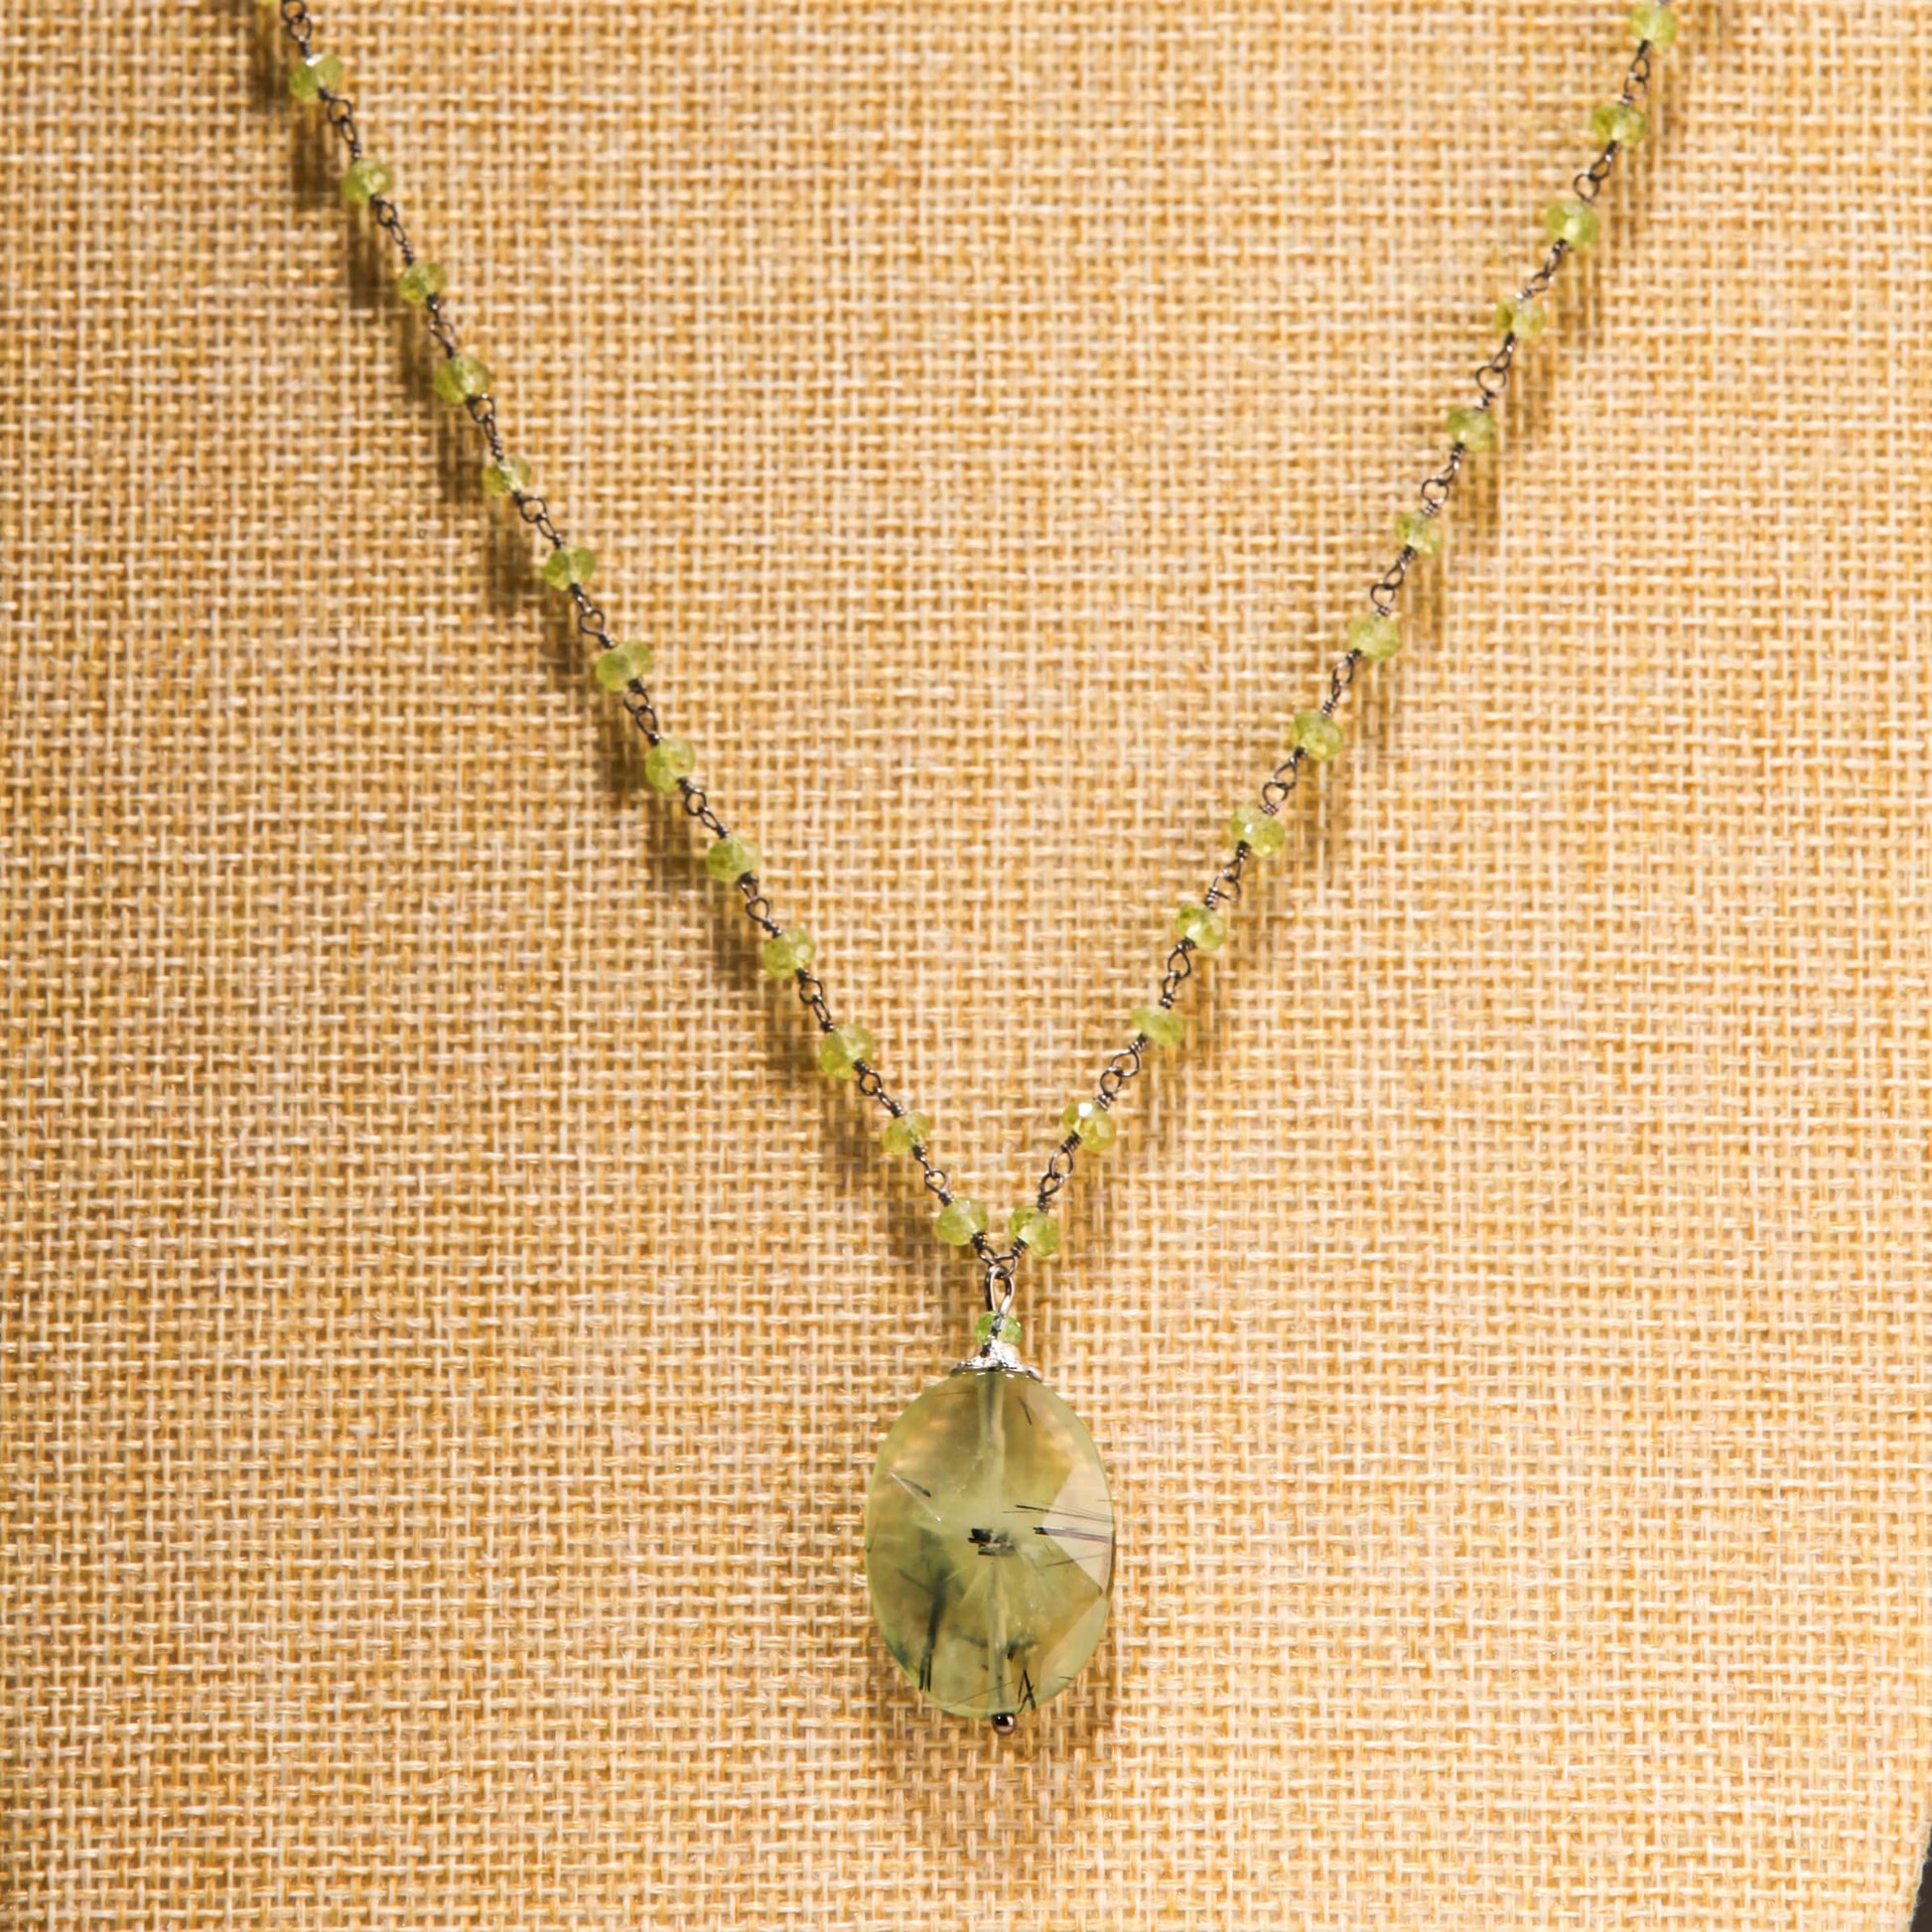 Genuine Prehnite Faceted Oval Pendant 18x26mm, Peridot 4mm Faceted Wire Wrapped Oxidized Silver Rosary Chain Handmade Necklace, 16"- 30"